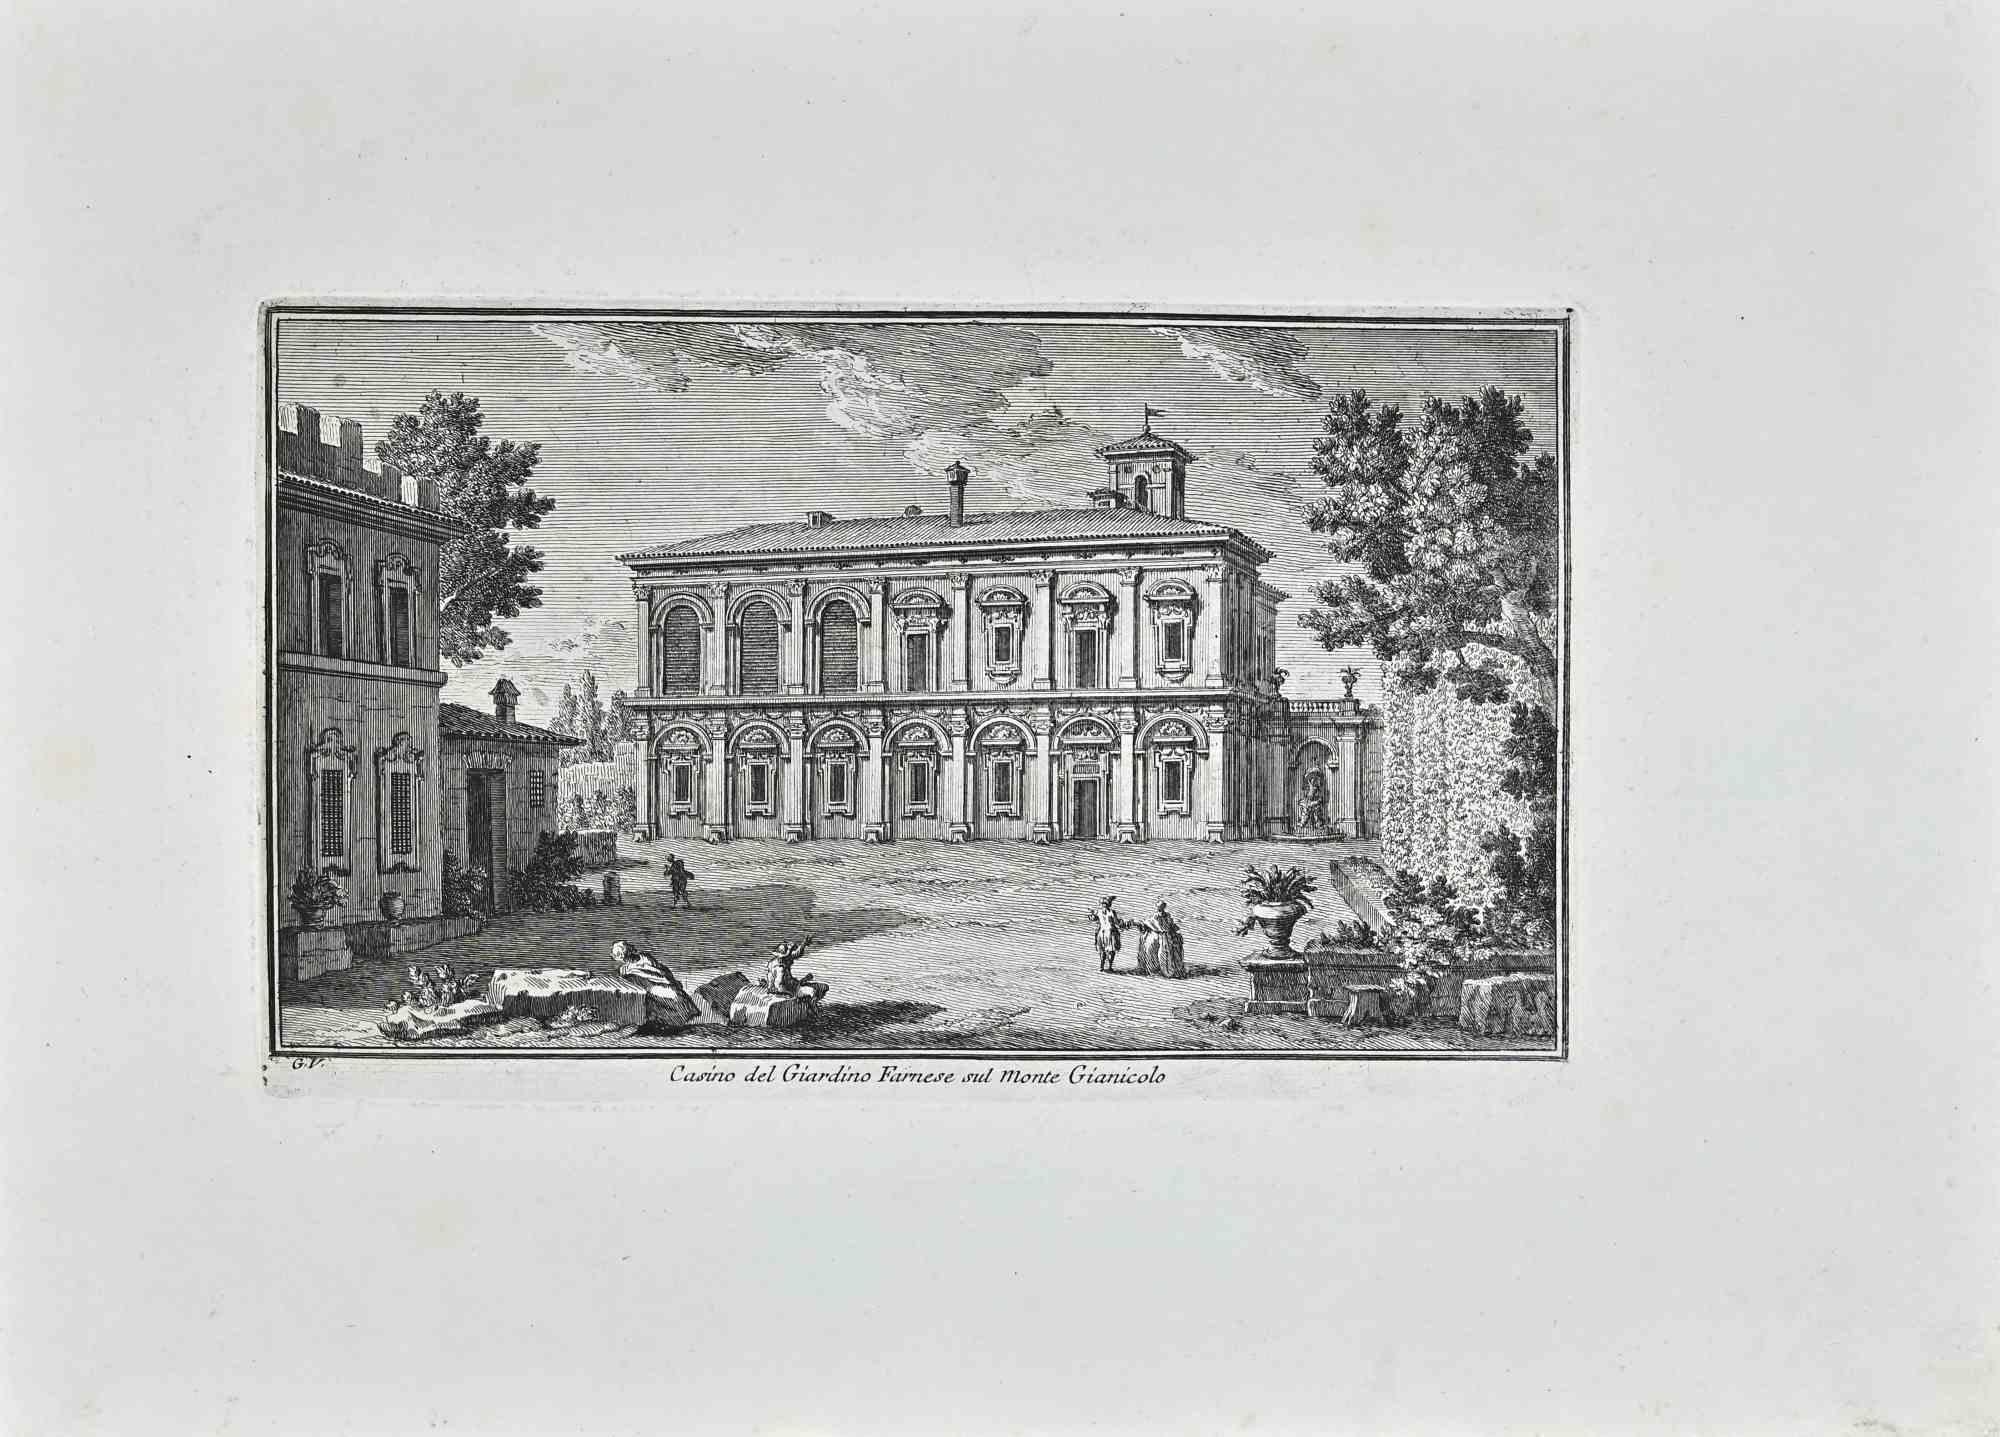 Casino del Giardino Farnese sul monte Gianicolo is an original etching of the Late 18th century realized by Giuseppe Vasi.

Signed and titled on plate lower margin. 

Good conditions.

Giuseppe Vasi  (Corleone,1710 - Rome, 1782) was an engraver,